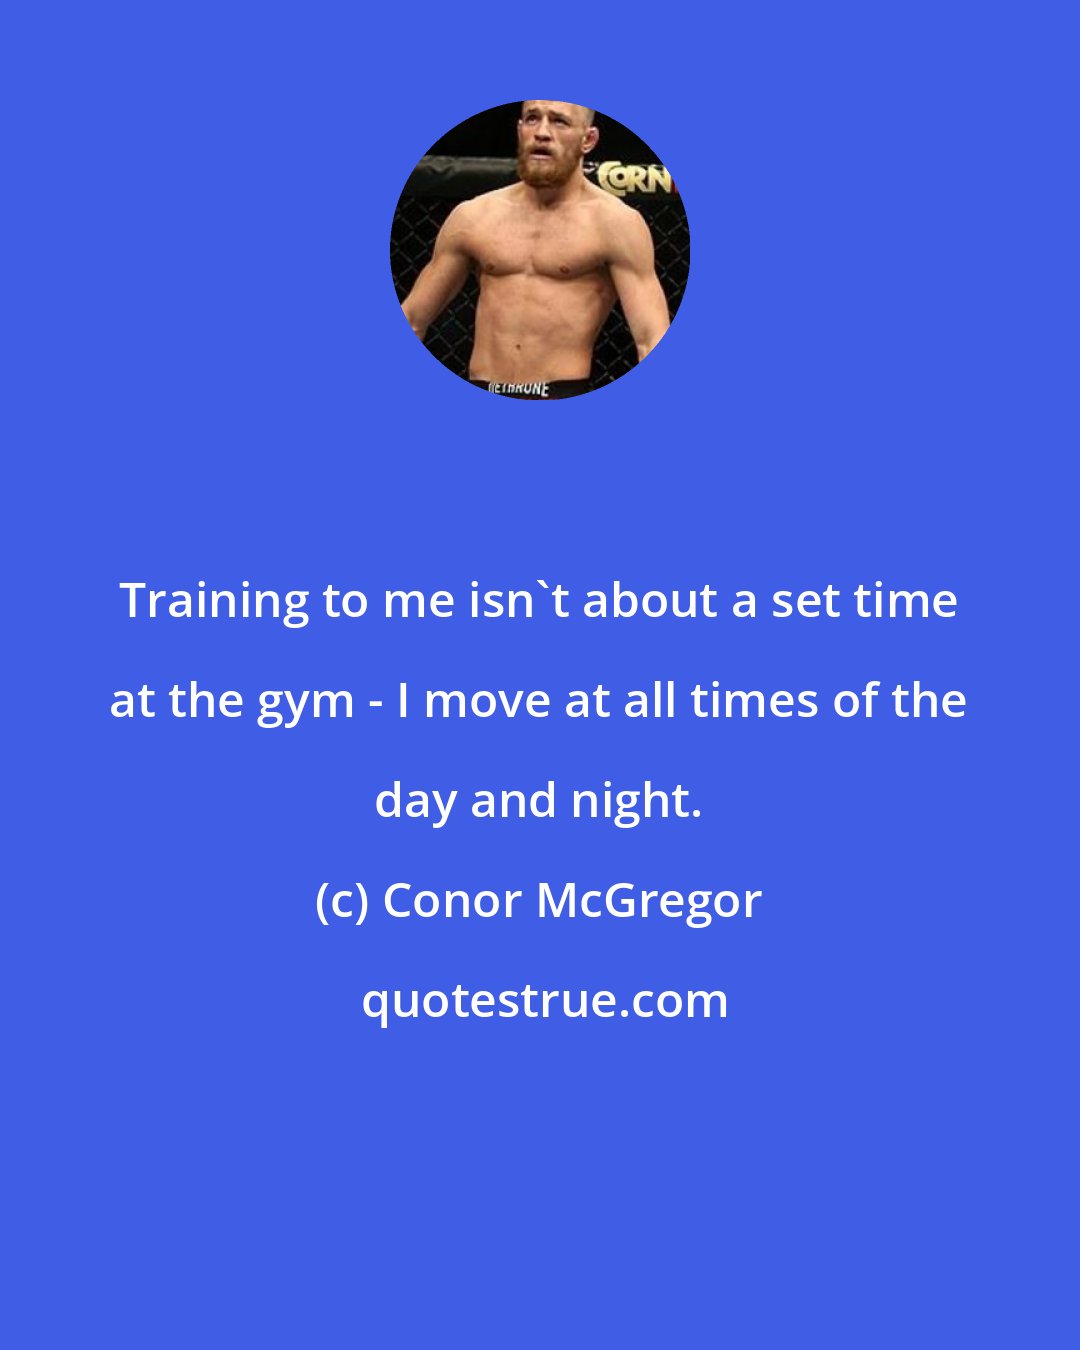 Conor McGregor: Training to me isn't about a set time at the gym - I move at all times of the day and night.